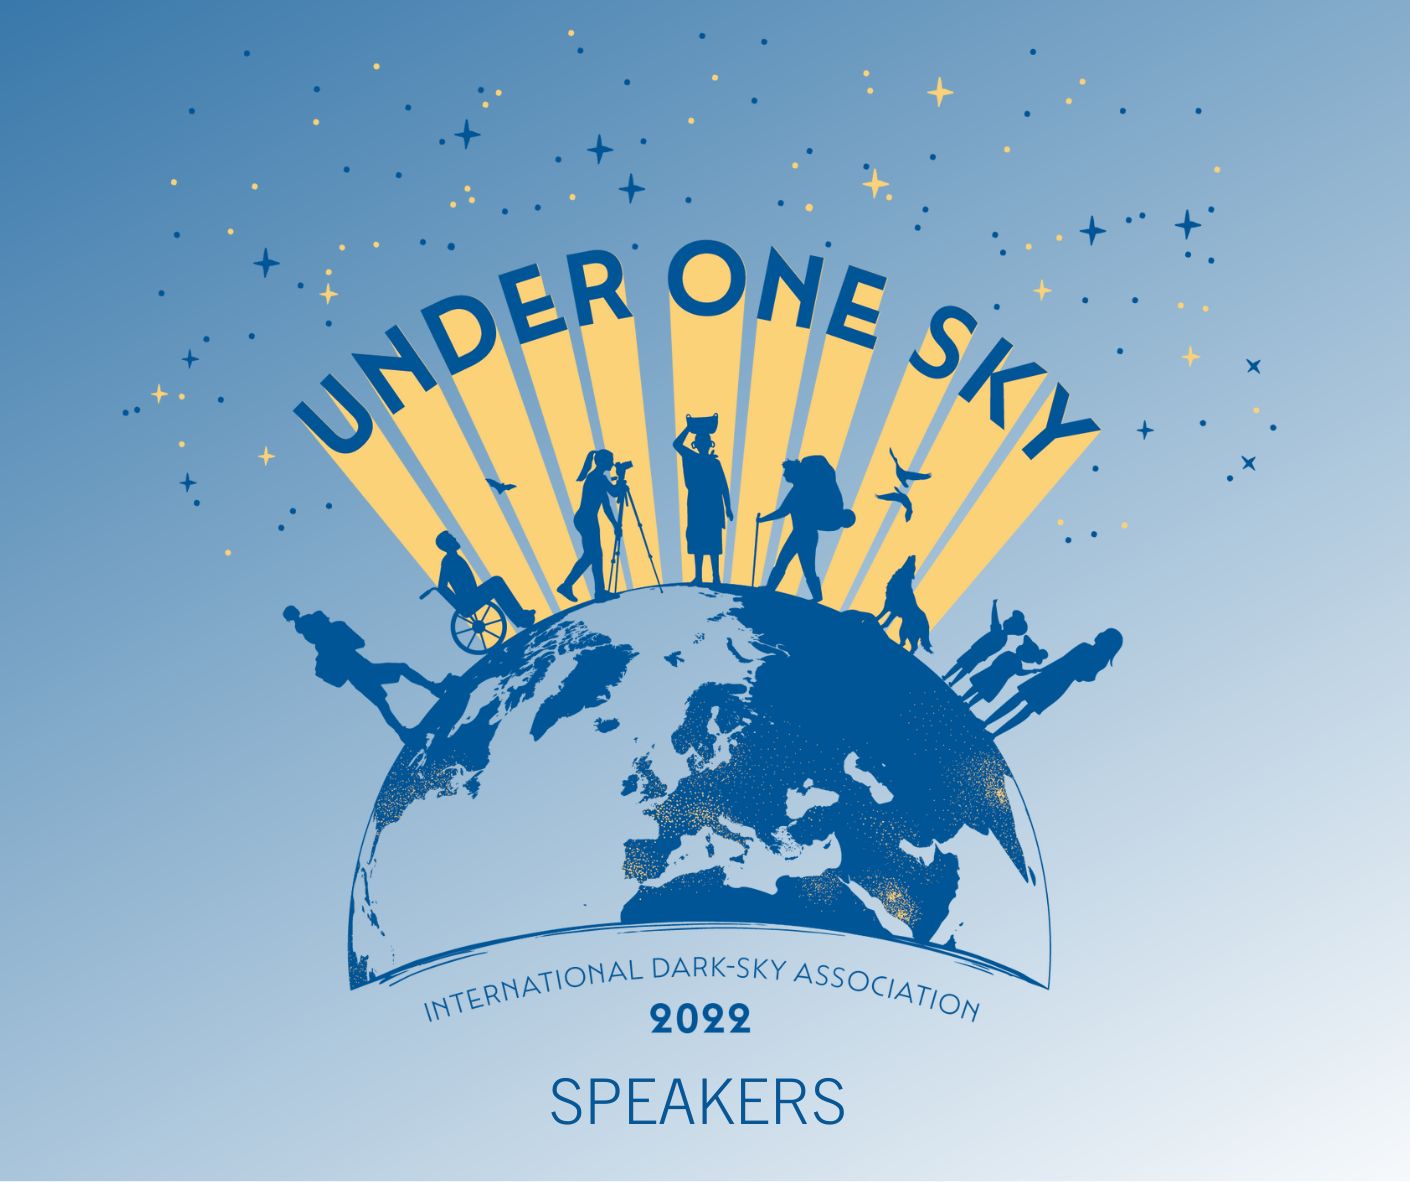 Speakers for Under One Sky 2022 Image